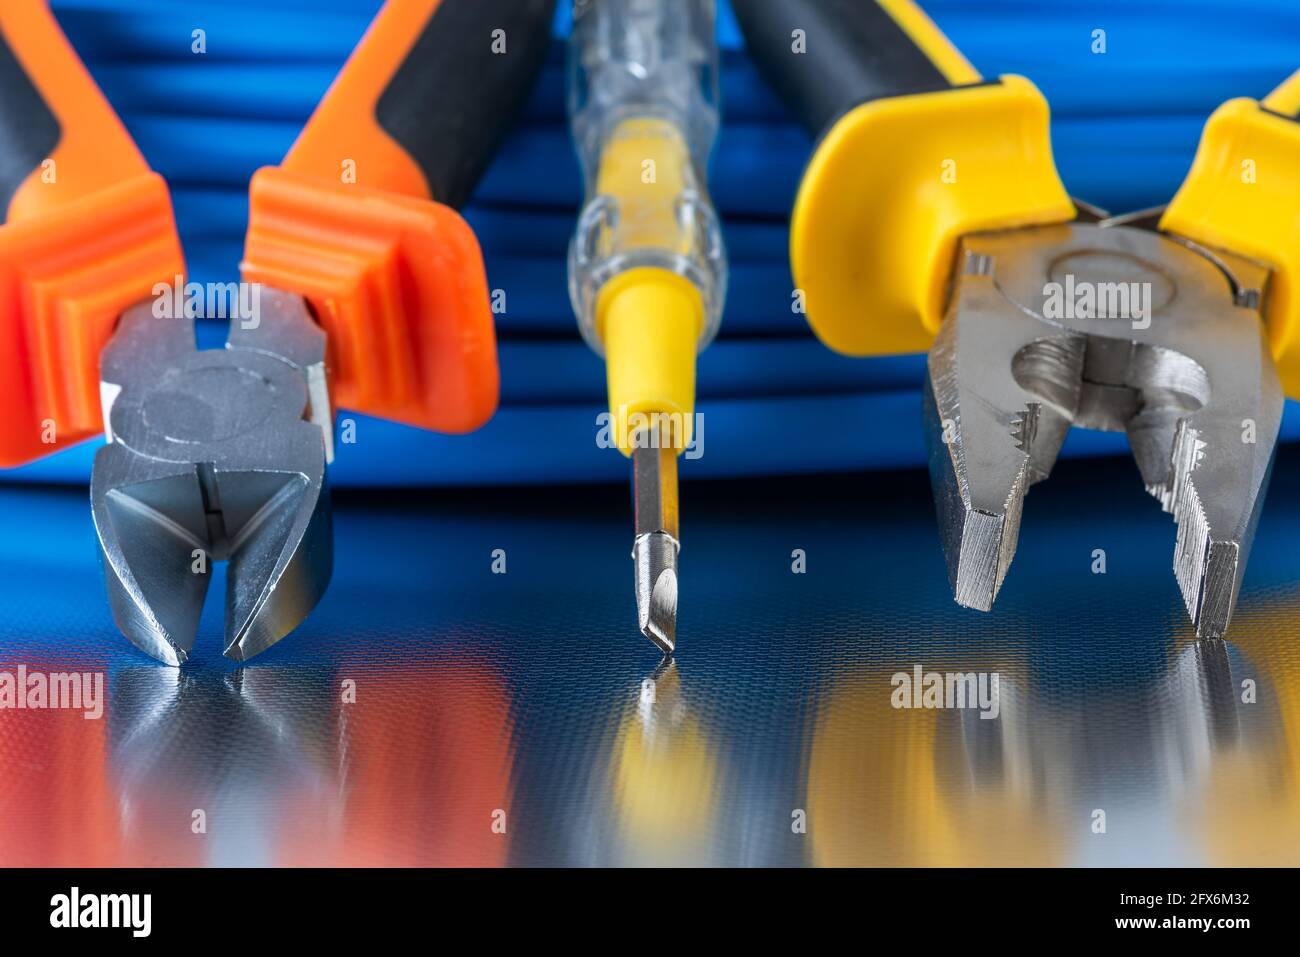 Electrical installation tool and cable wire close-up shiny workshop table Stock Photo